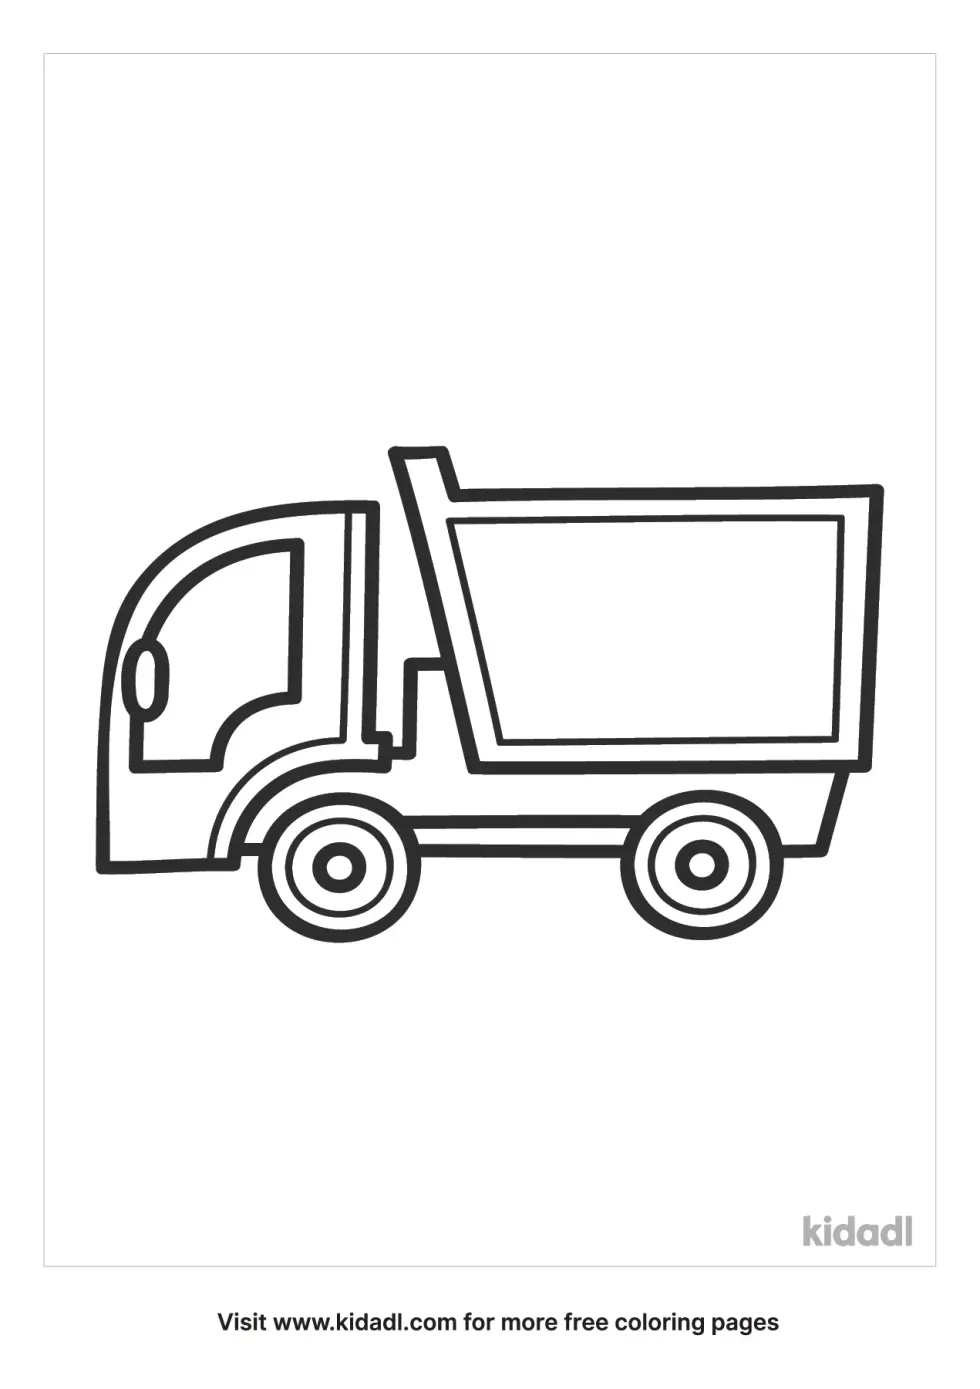 Toddler Truck Coloring Page